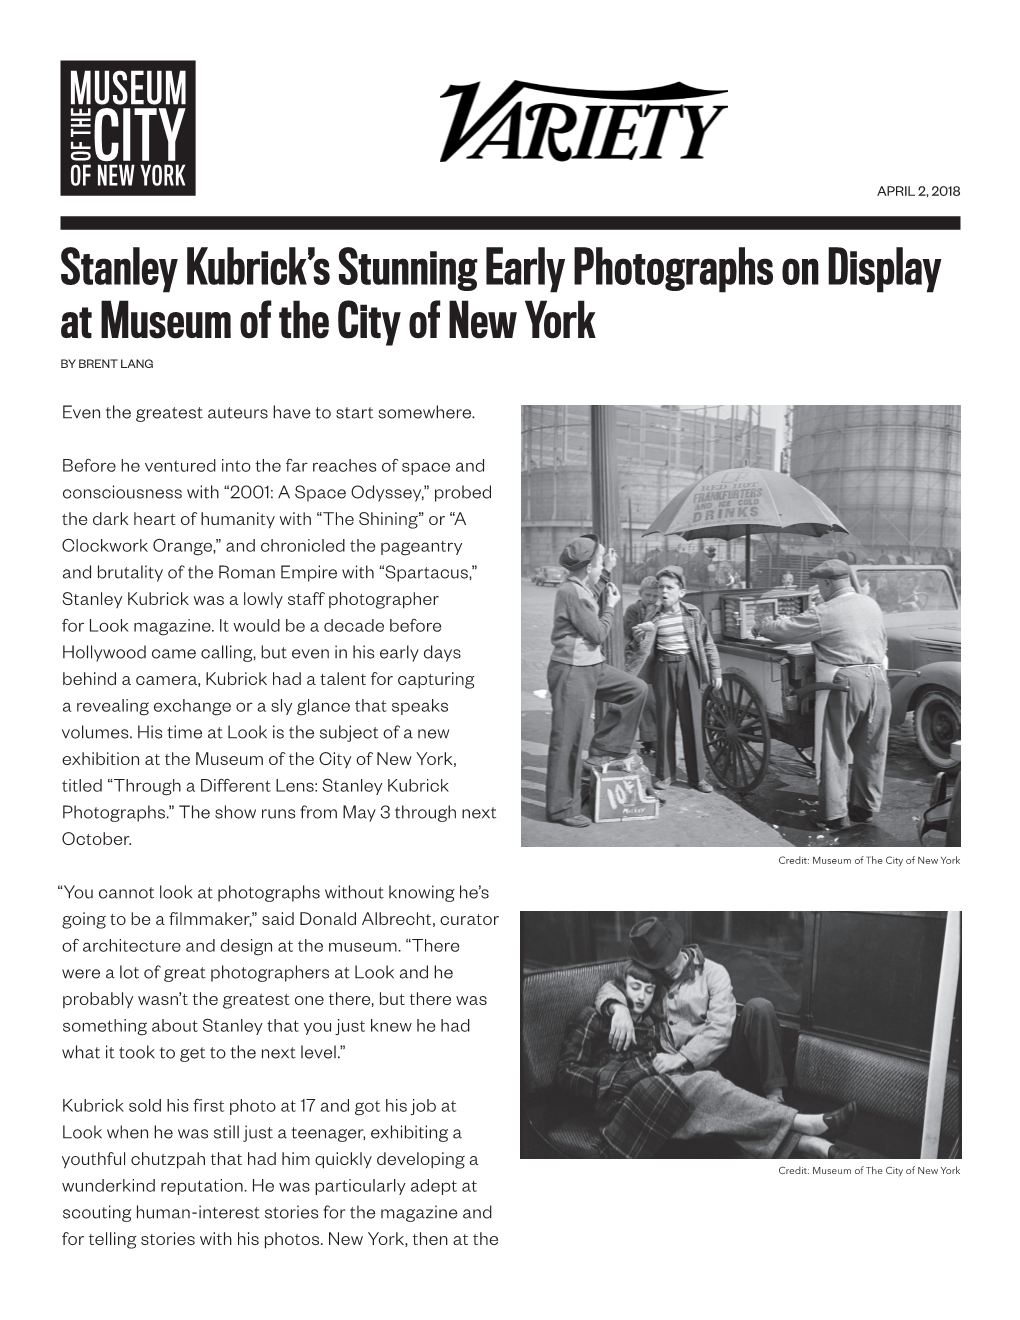 Stanley Kubrick's Stunning Early Photographs on Display at Museum